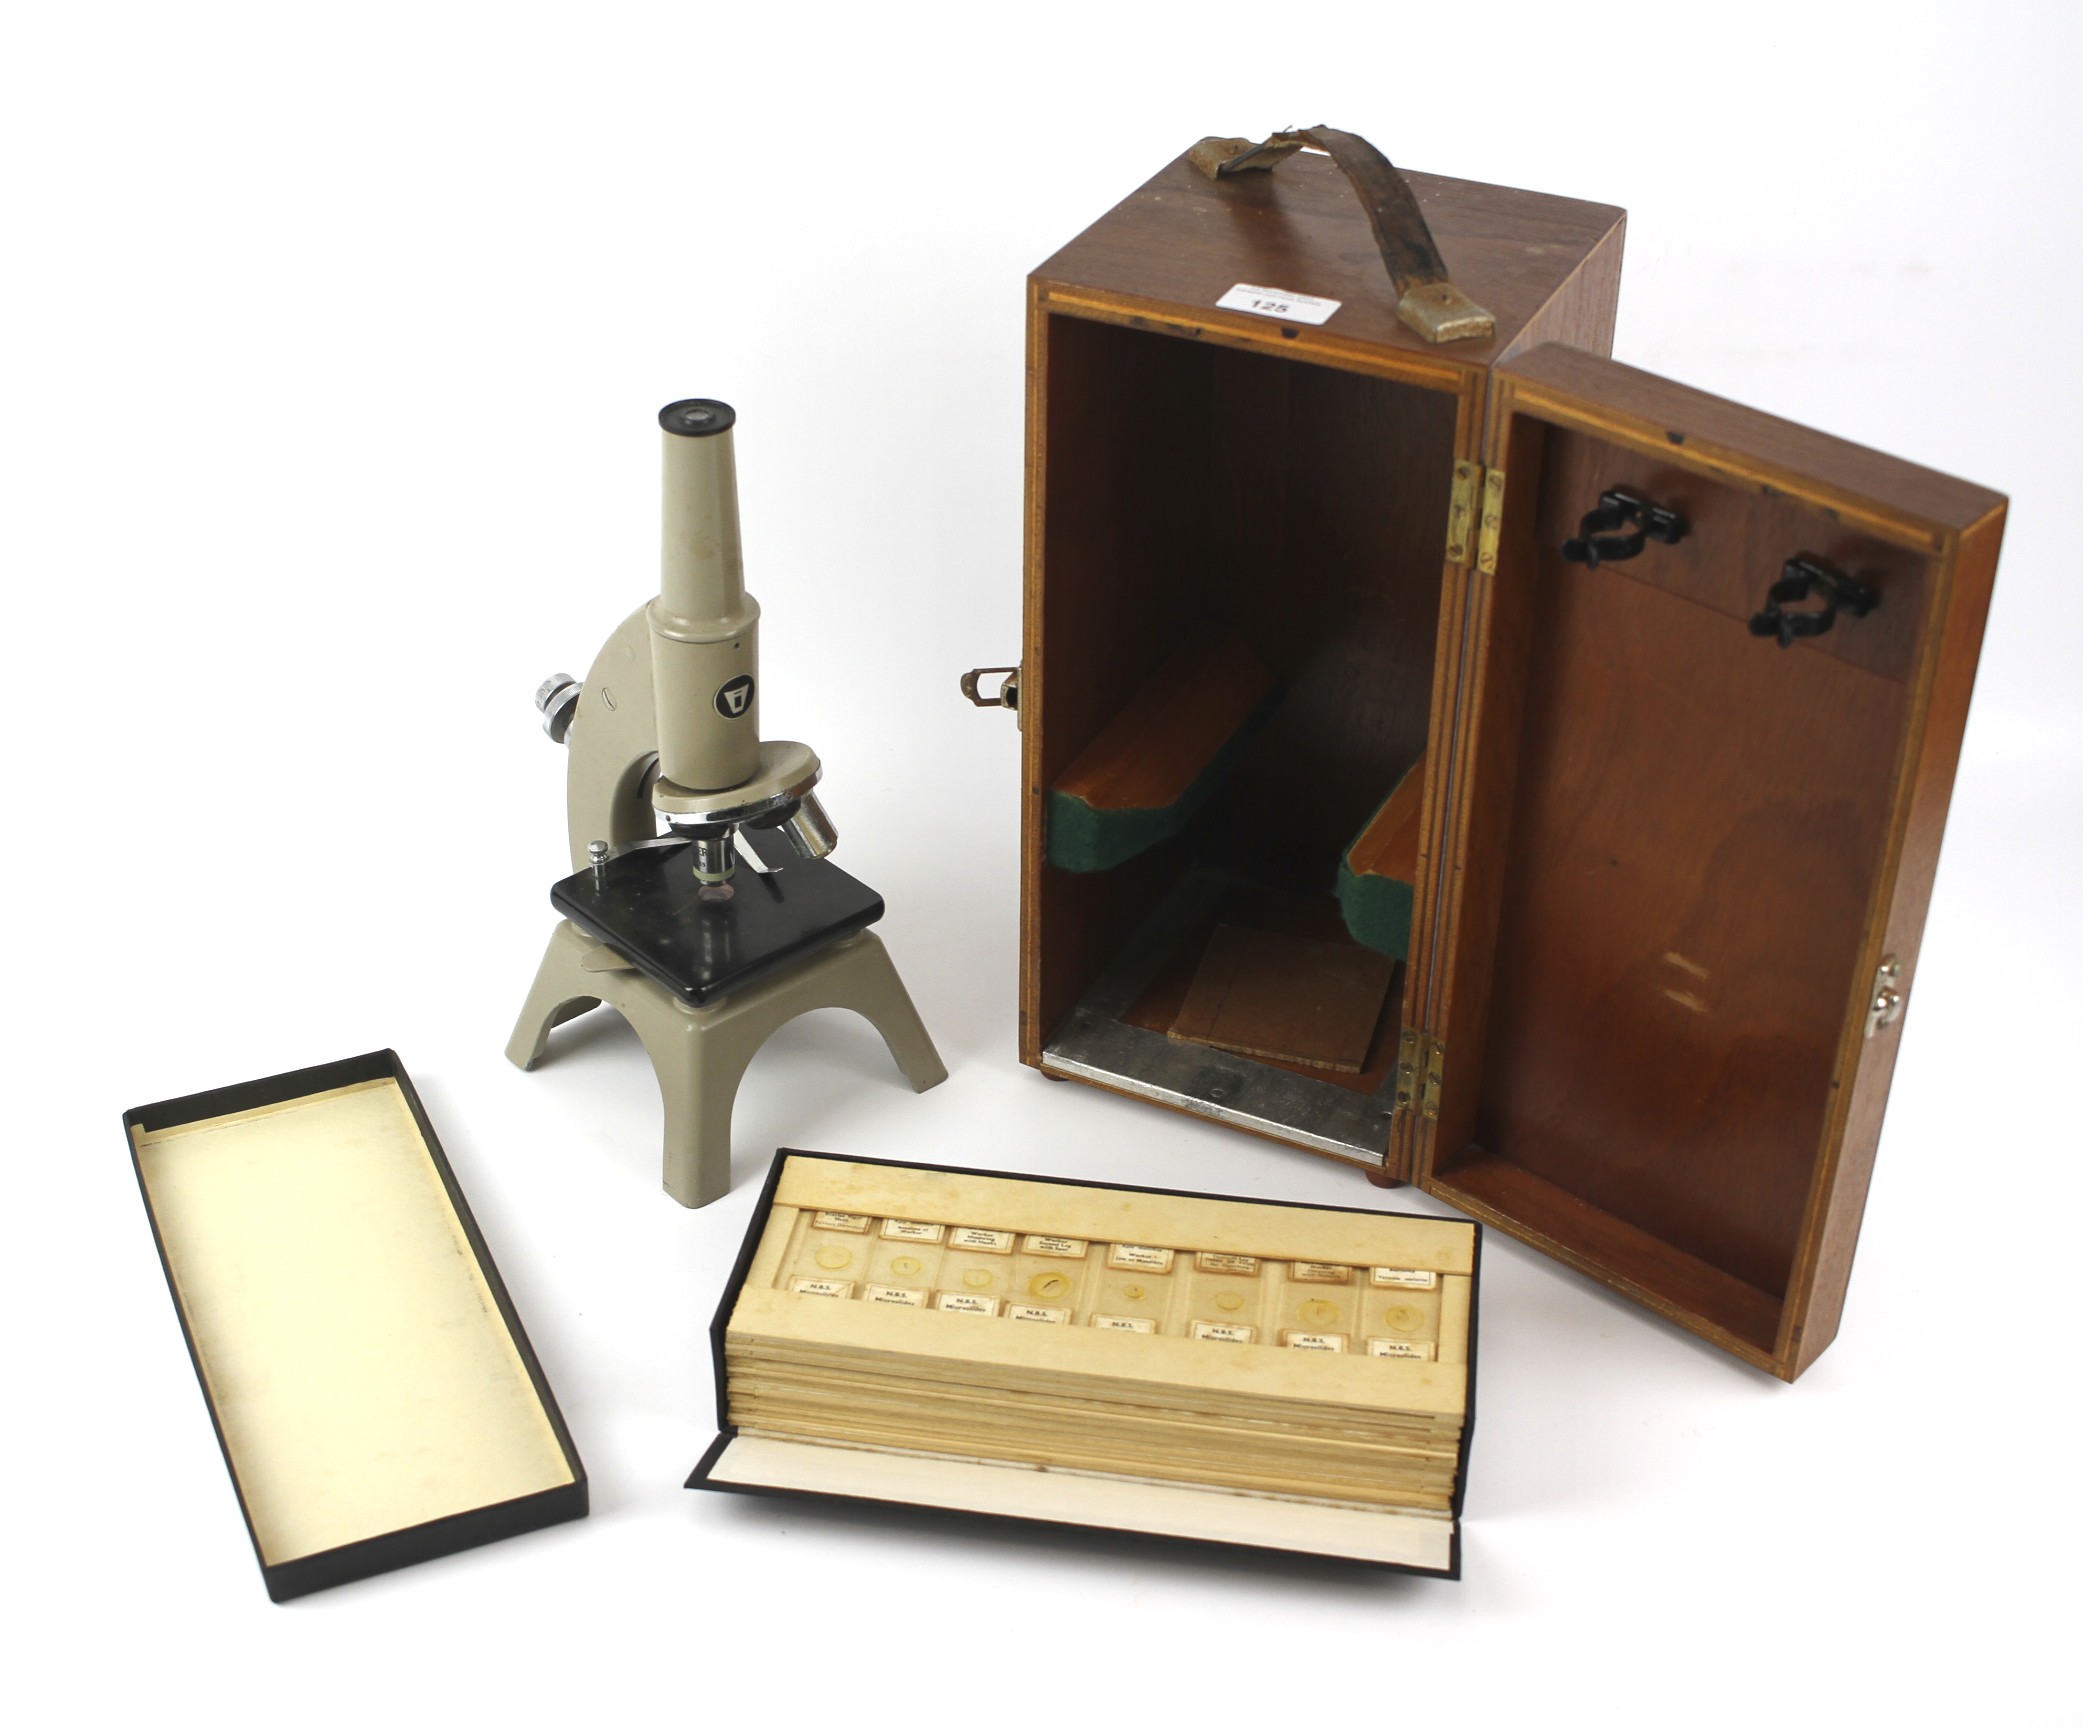 A Vickers K1859 microscope in original wooden carry case.